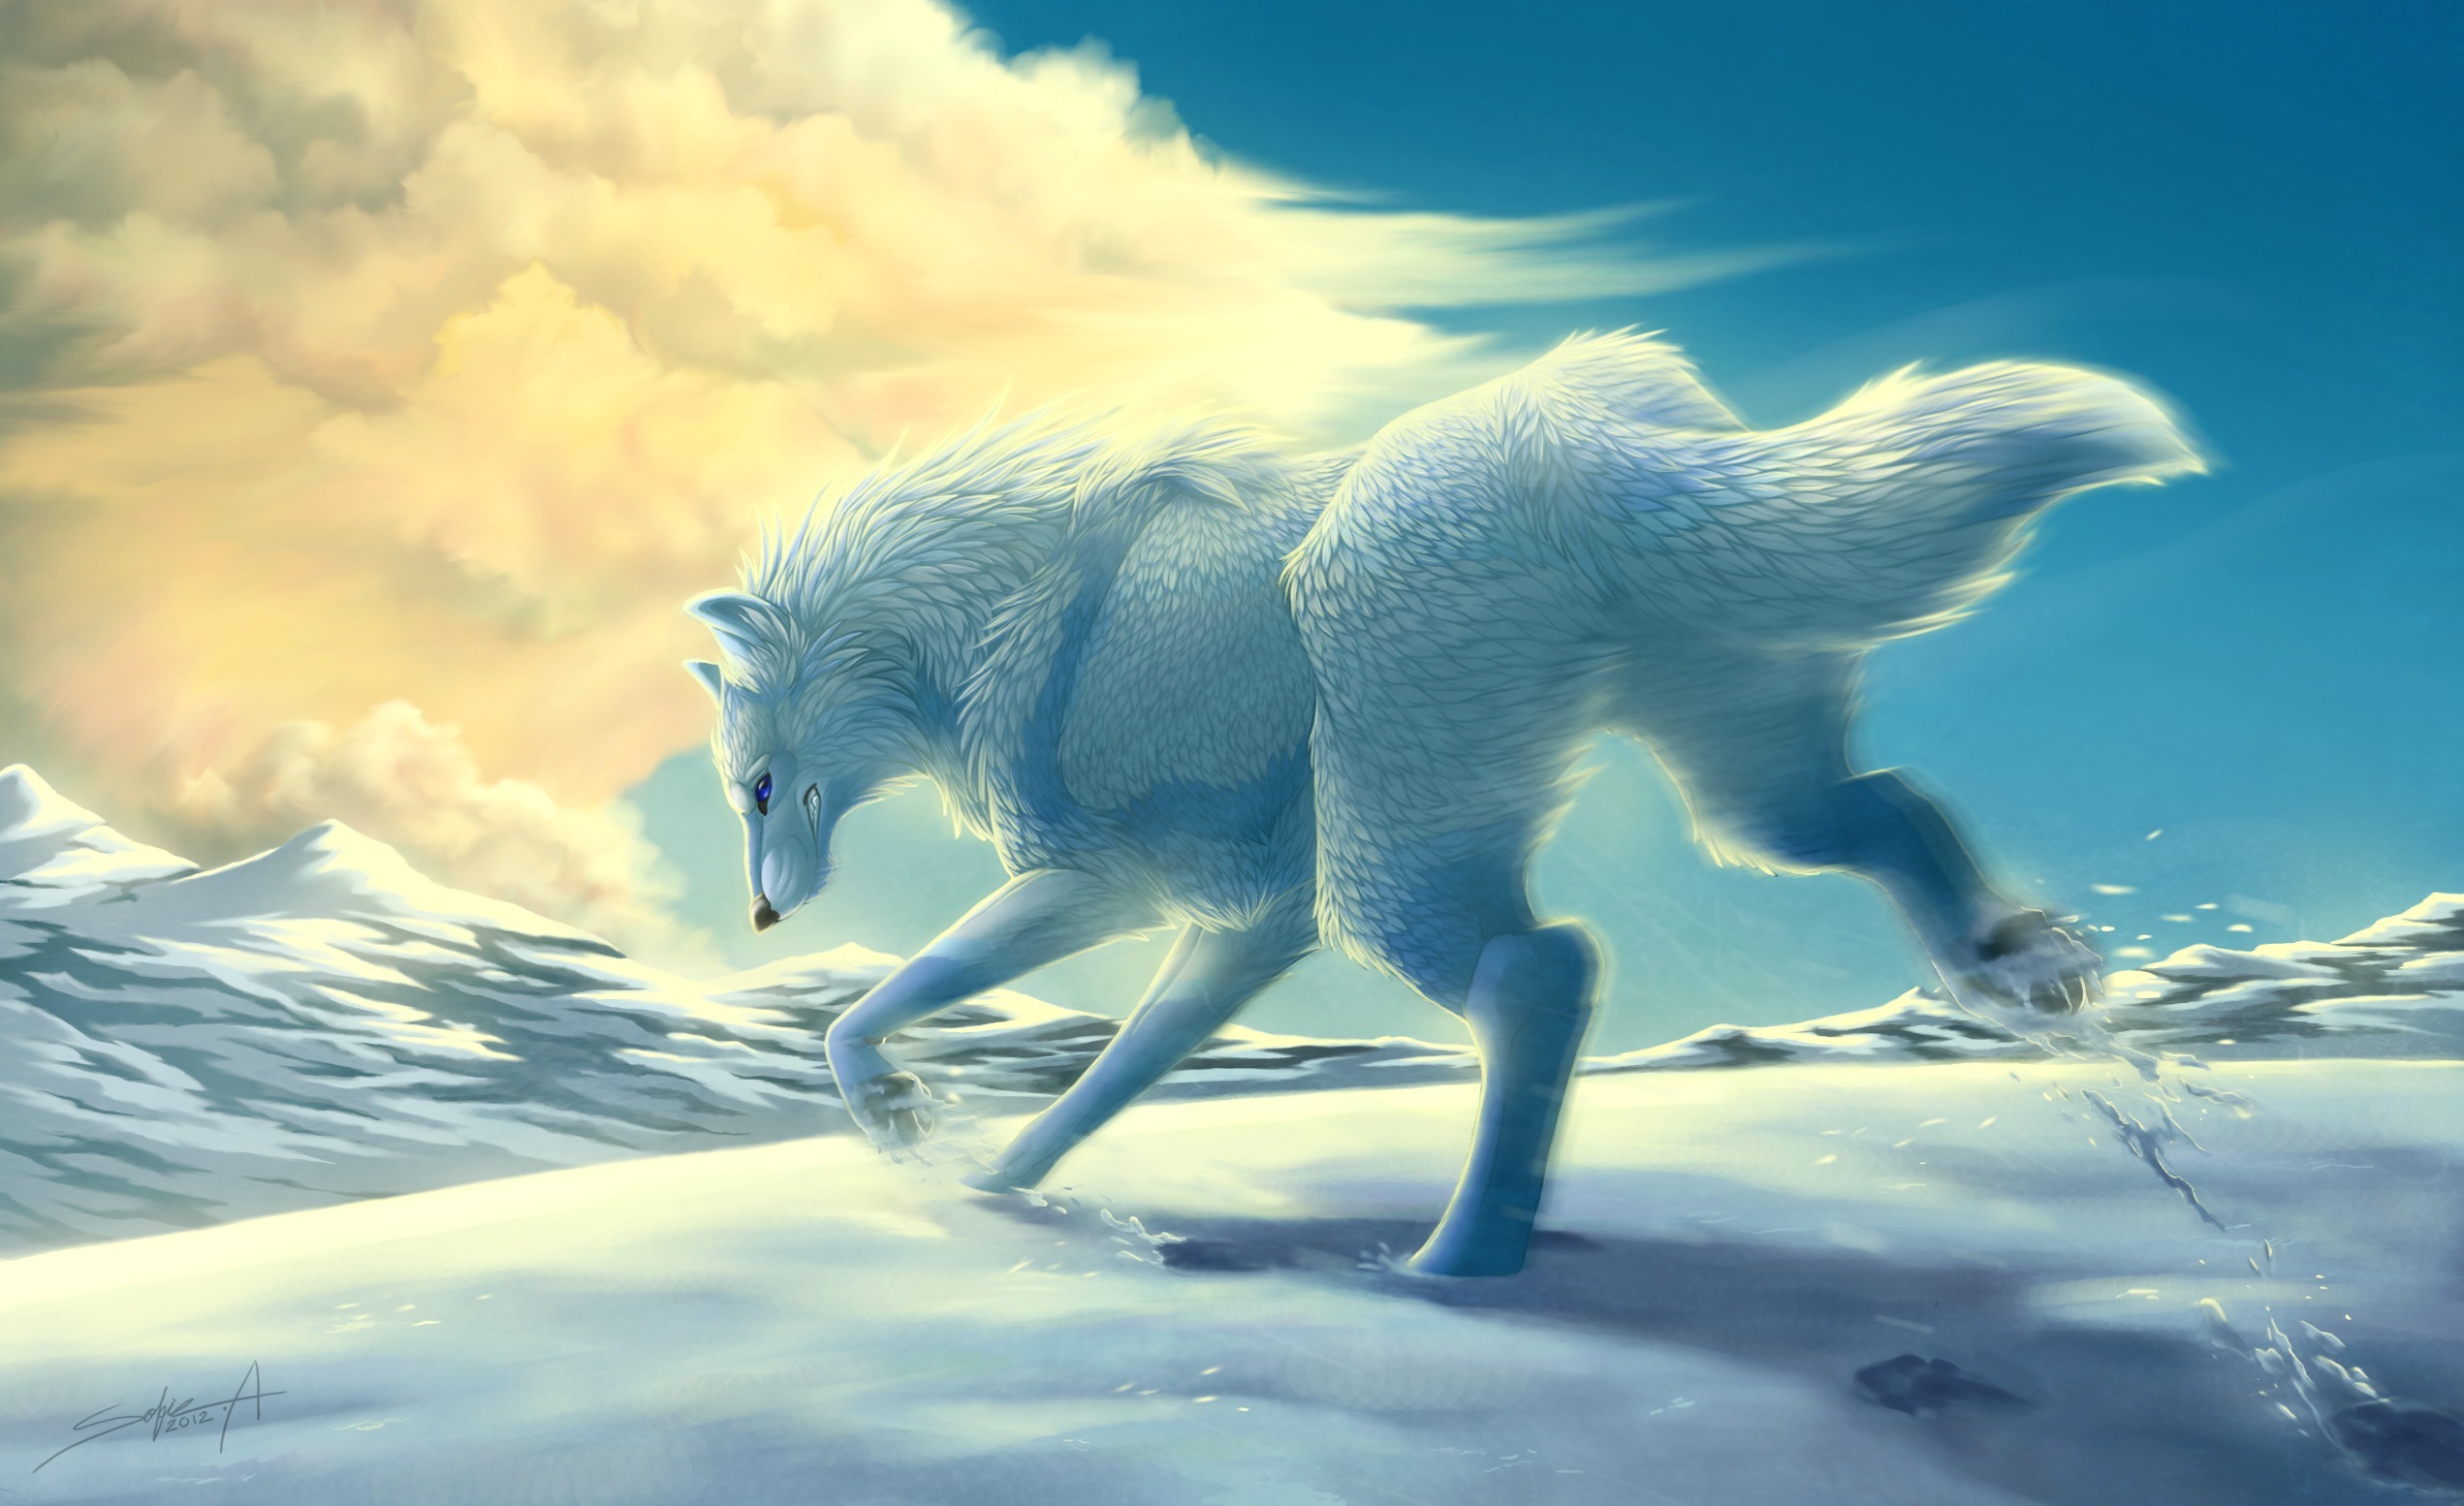 Snow Wolf Wallpaper And Image Pictures